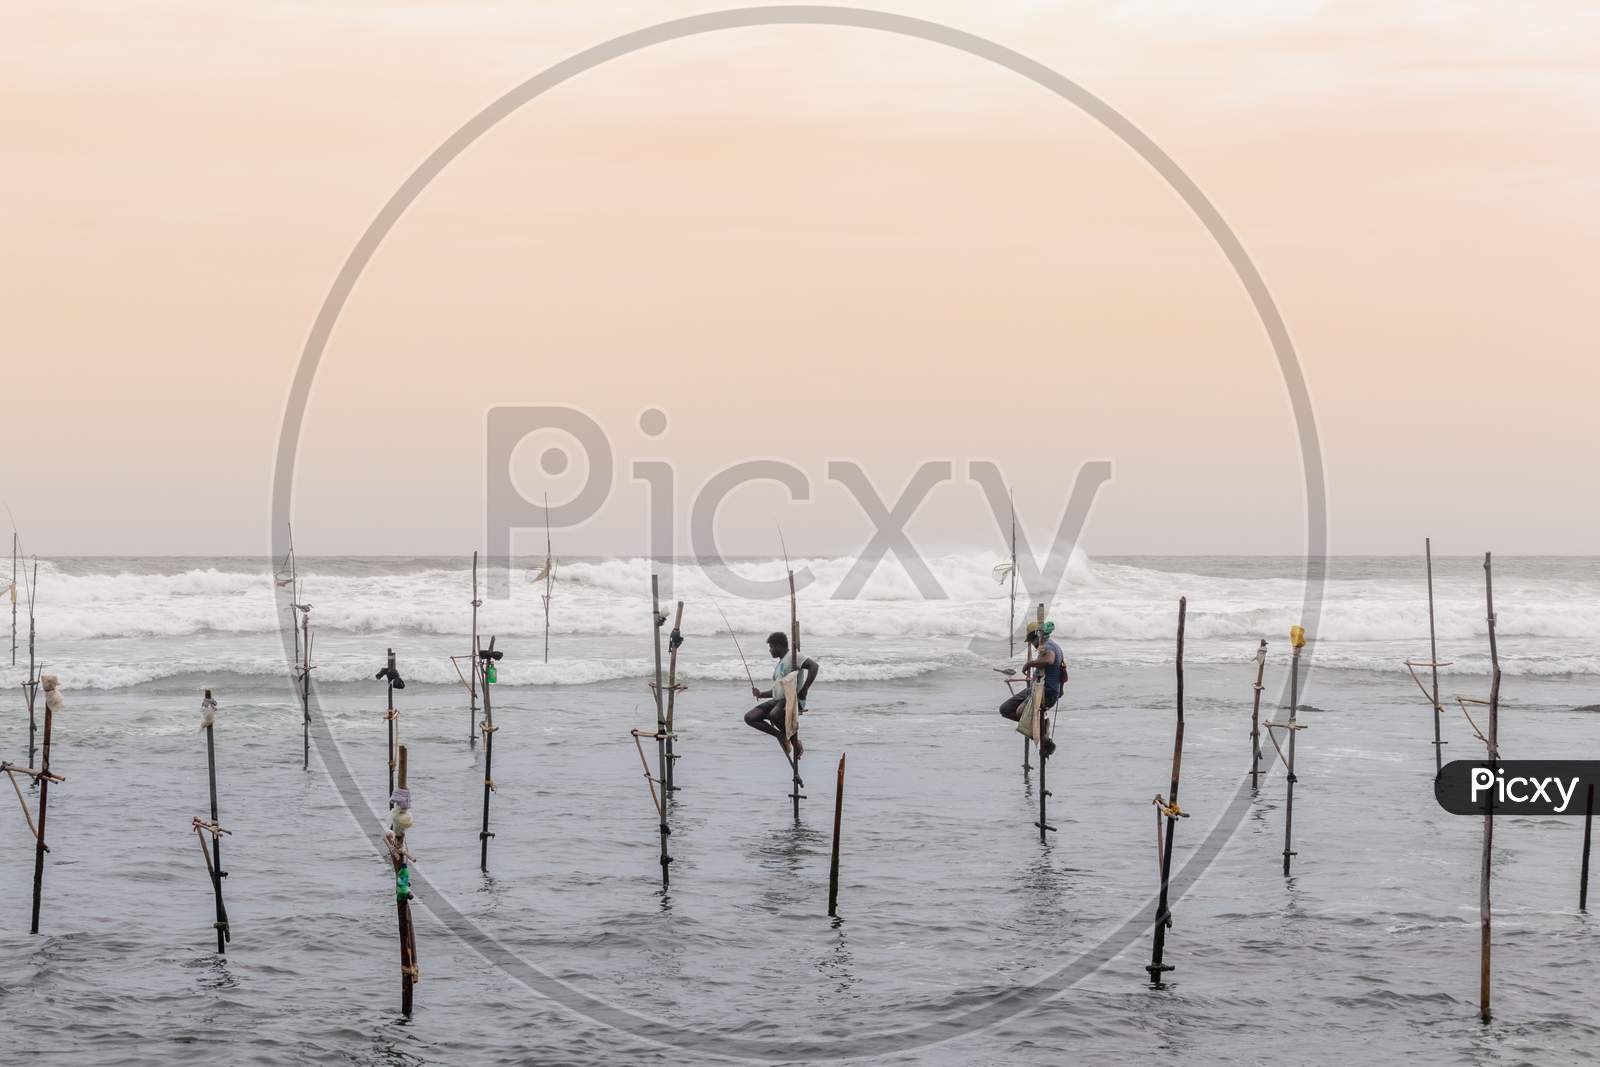 A Couple Of Stilt Fishermen Sitting On Their Poles With Wooden Fishing Rods In Their Hands In The Sunset Evening. Ocean Waves Crash Behind Them In The Background With An Orange Yellowish Sky.